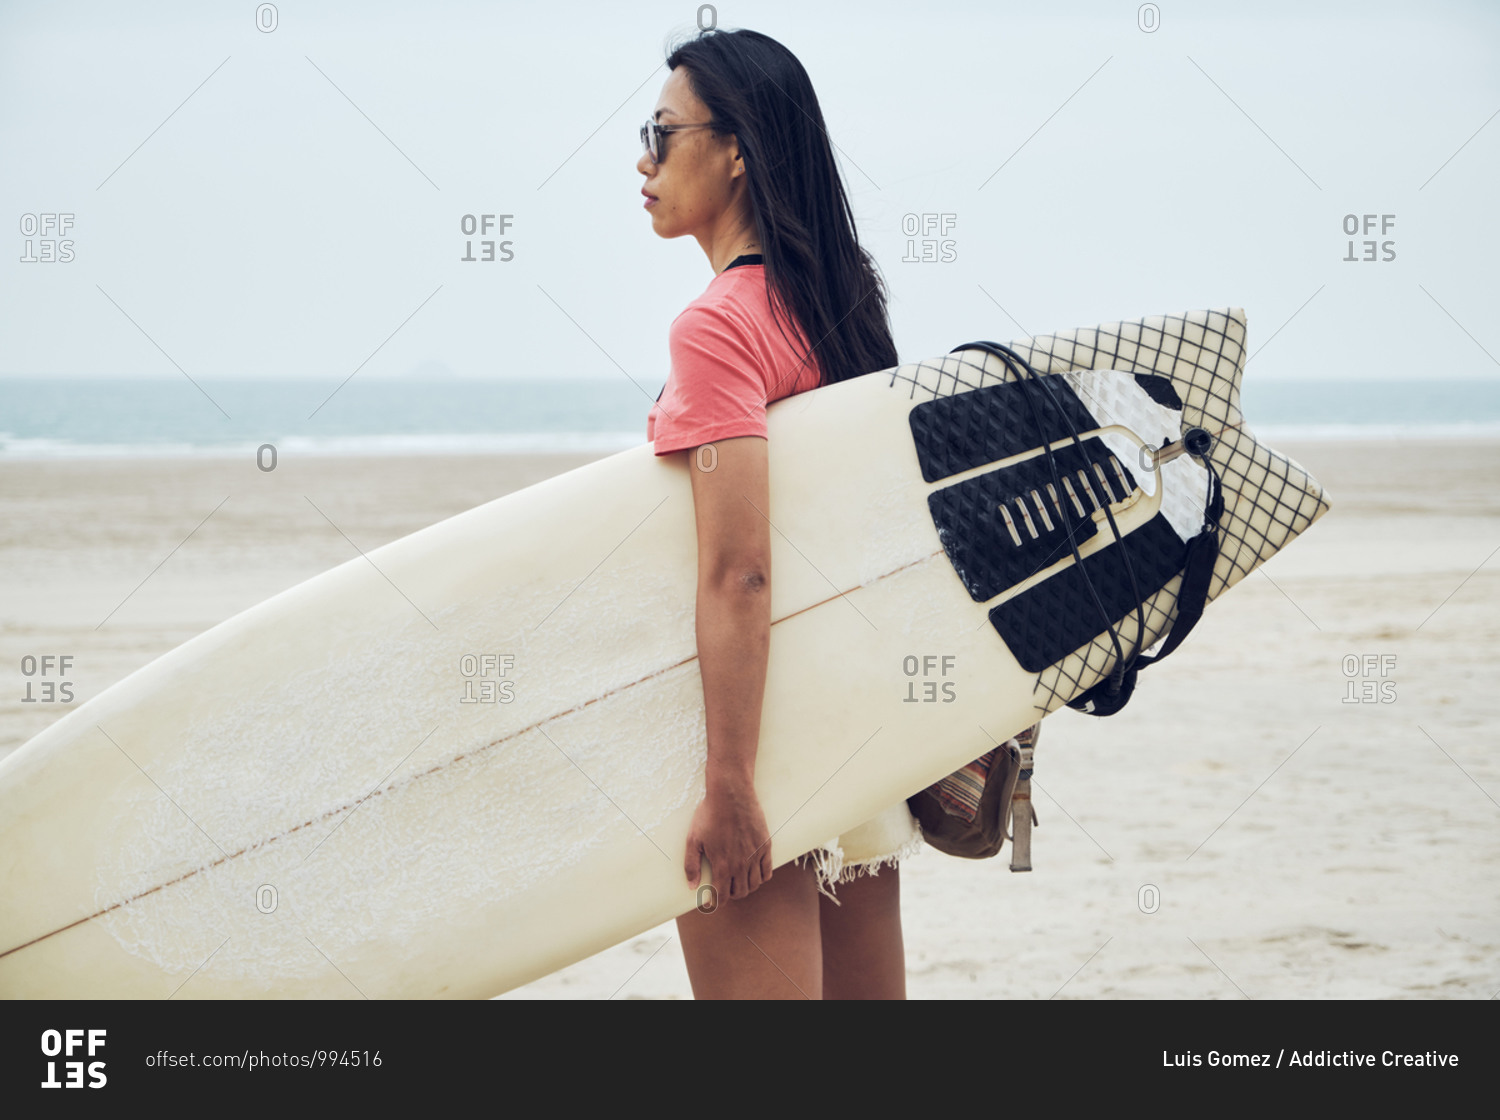 Side view of young Asian female surfer in summer outfit
walking on sandy beach and carrying surfboard against calm blue sea
looking away stock photo - OFFSET